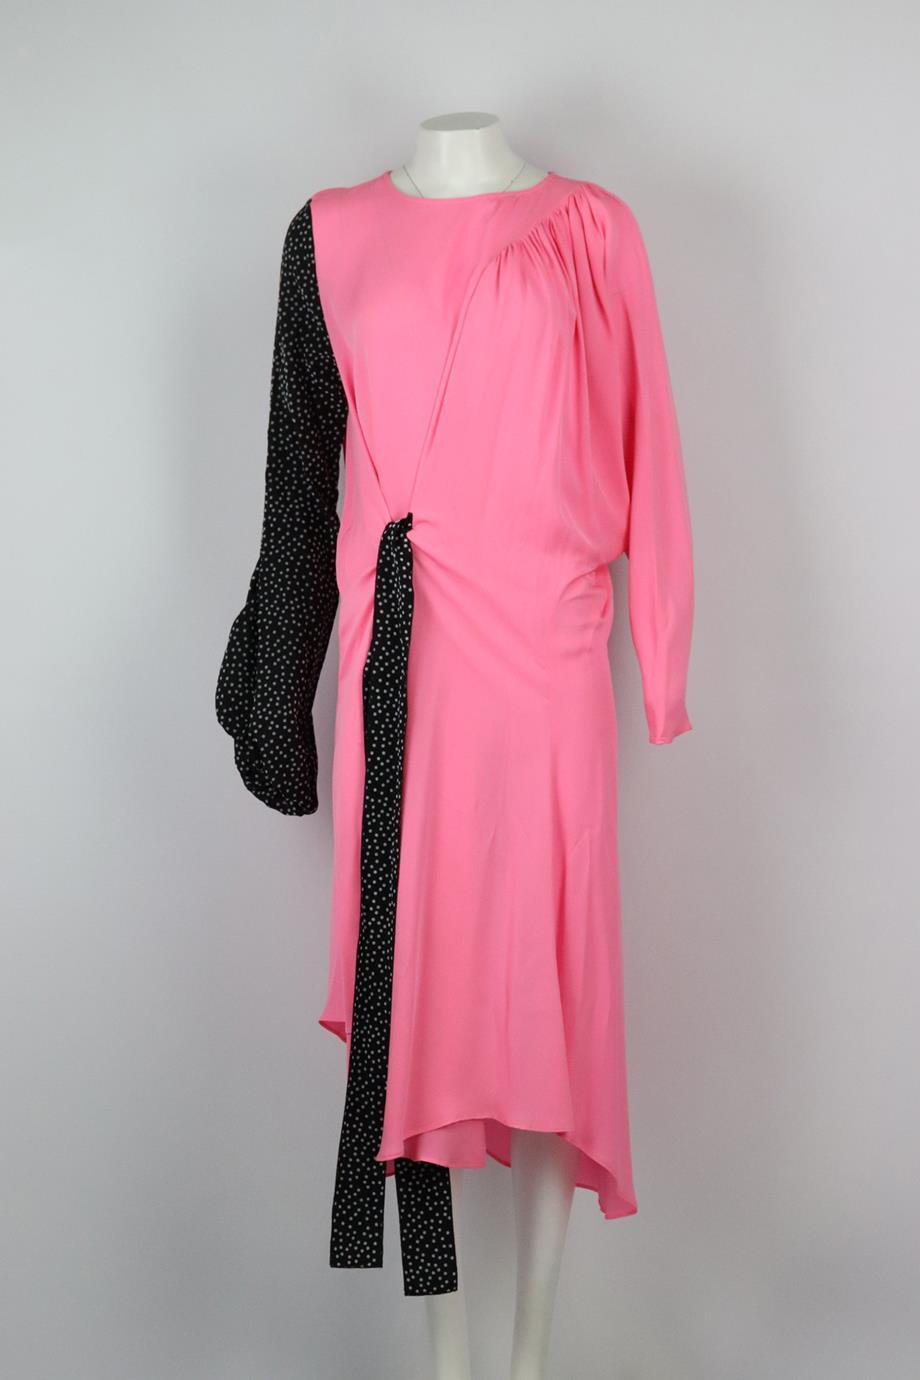 JW Anderson asymmetric tie detailed silk midi dress. Pink, black and white. Long sleeve, crewneck. Zip fastening at back. 100% Silk; fabric2: 100% cupro. Size: UK 8 (US 4, FR 36, IT 40). Bust: 52 in. Waist: 45 in. Hips: 58 in. Length: 44 in. Very